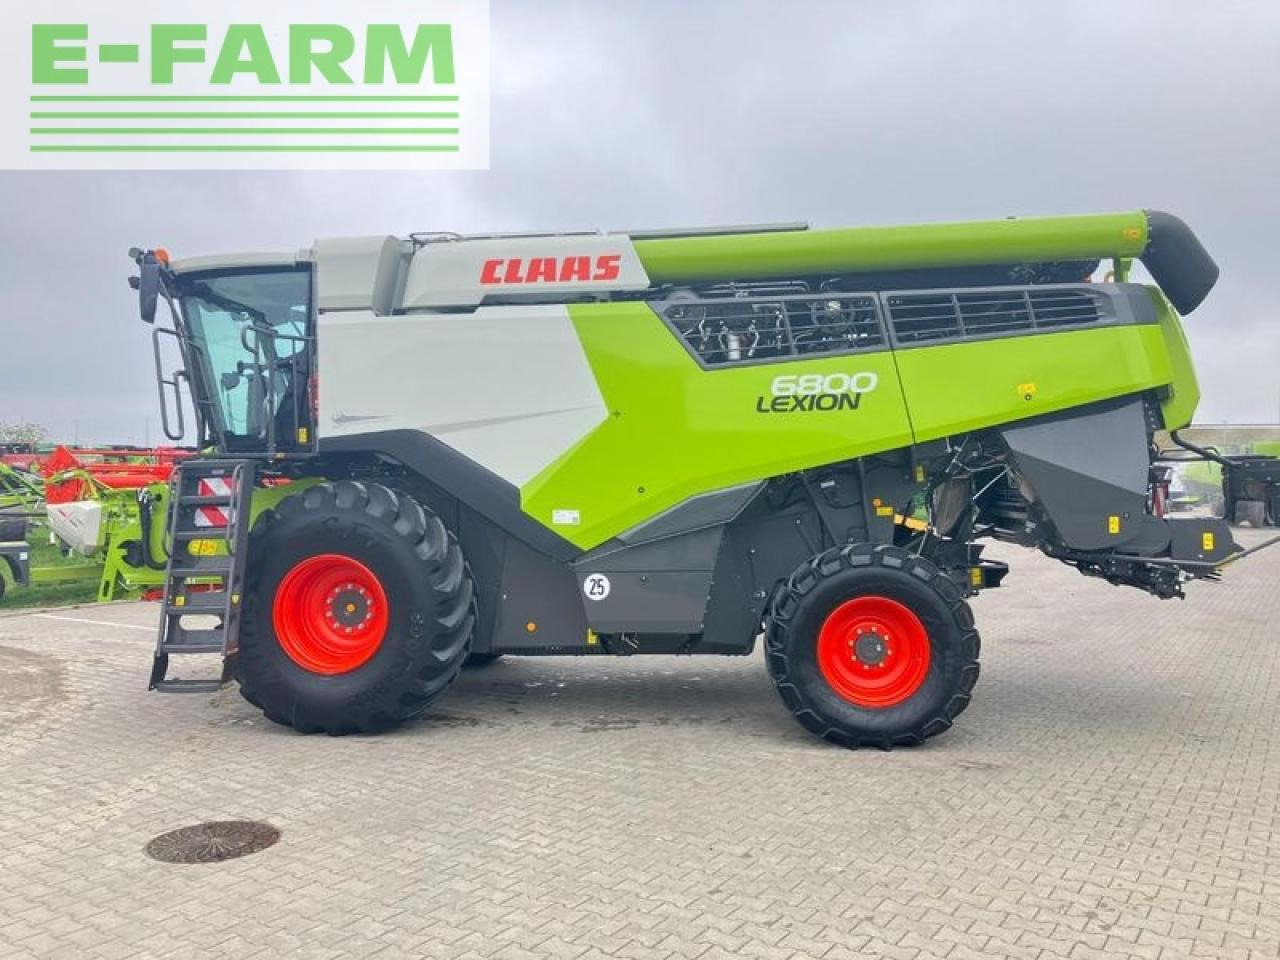 Combine harvester CLAAS lexion 6800: picture 17